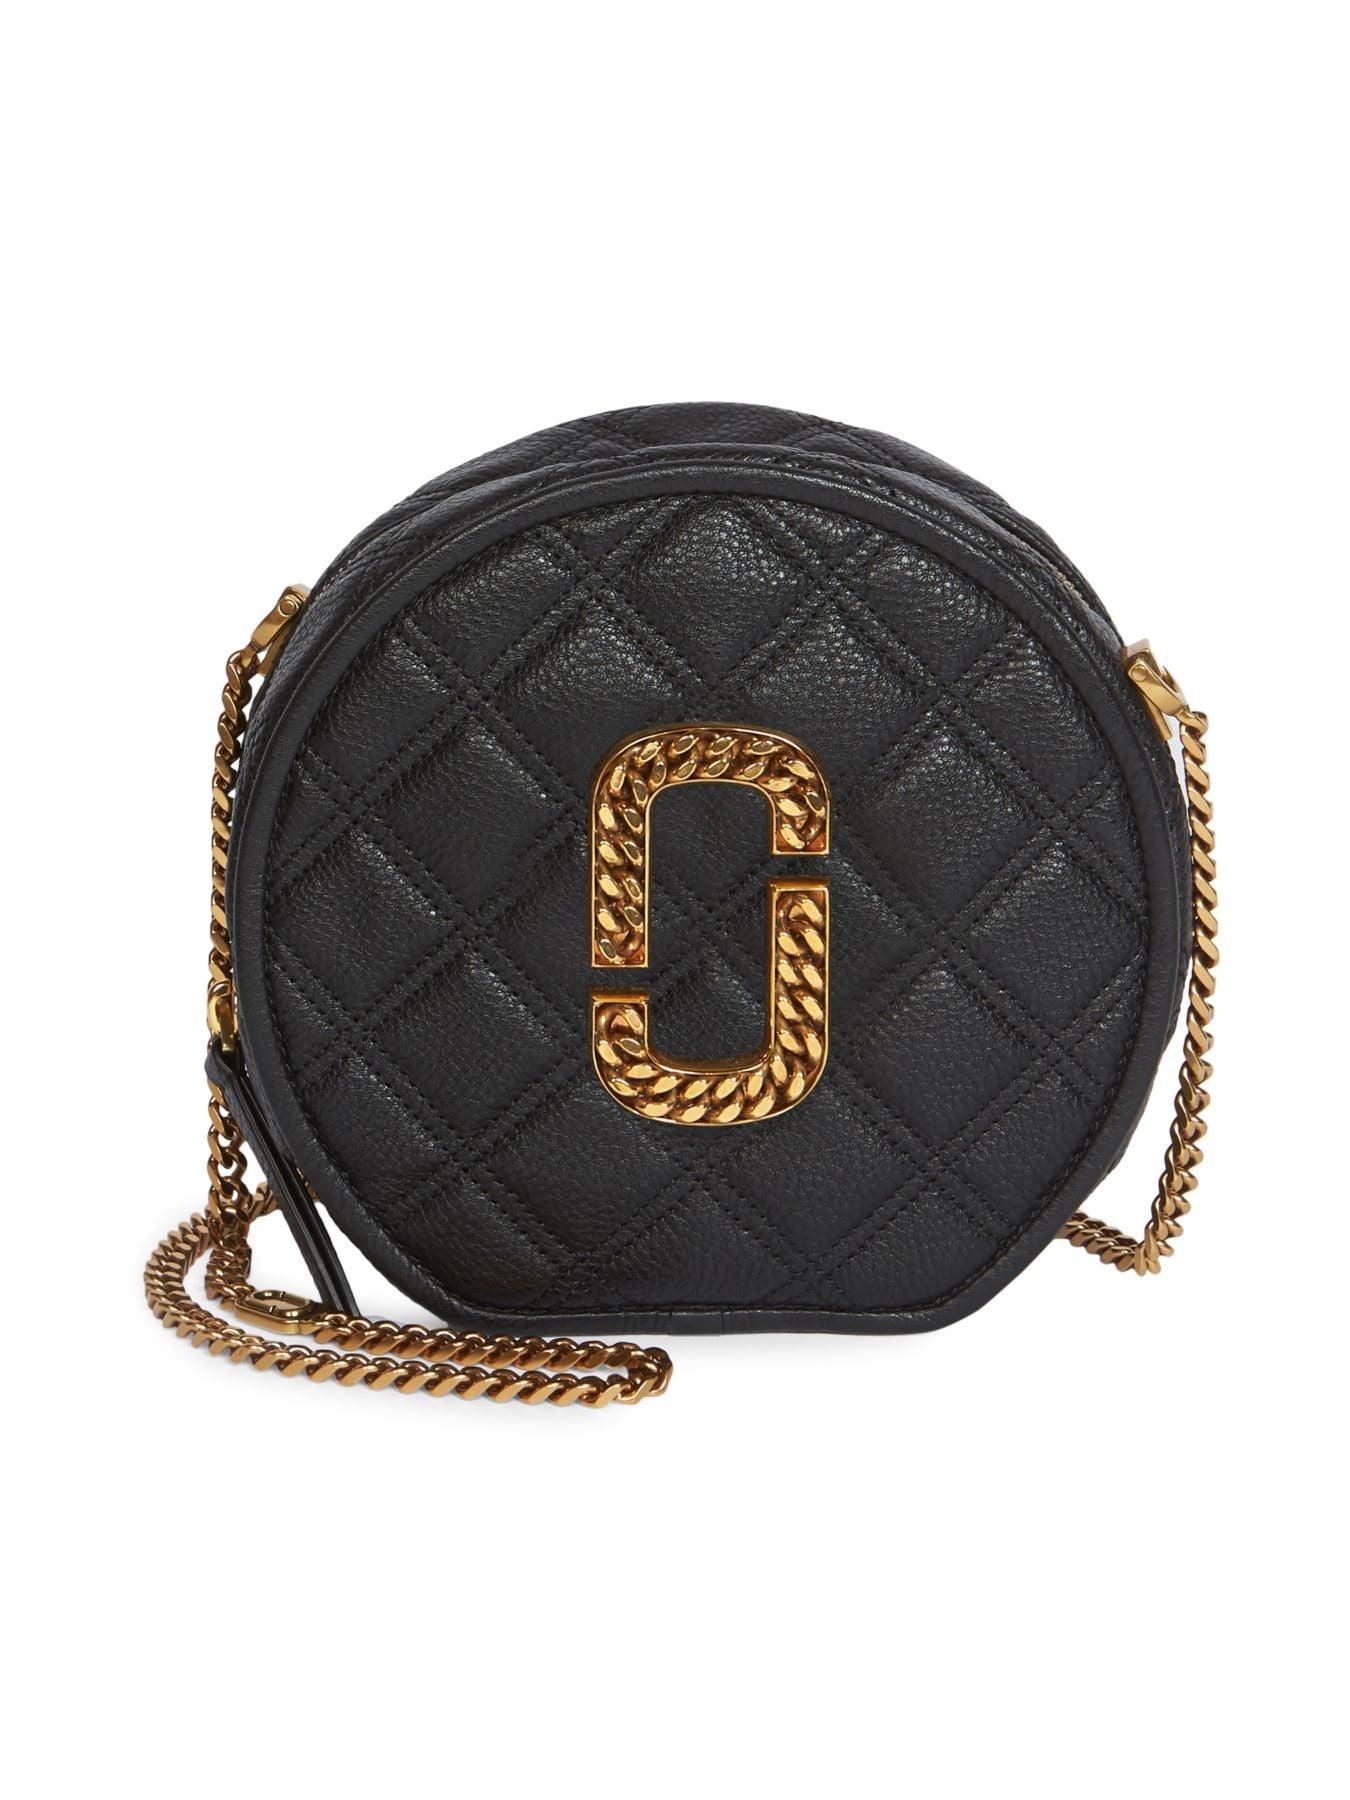 Marc Jacobs The Status Christy Circle Leather Crossbody Bag in Black - Lyst